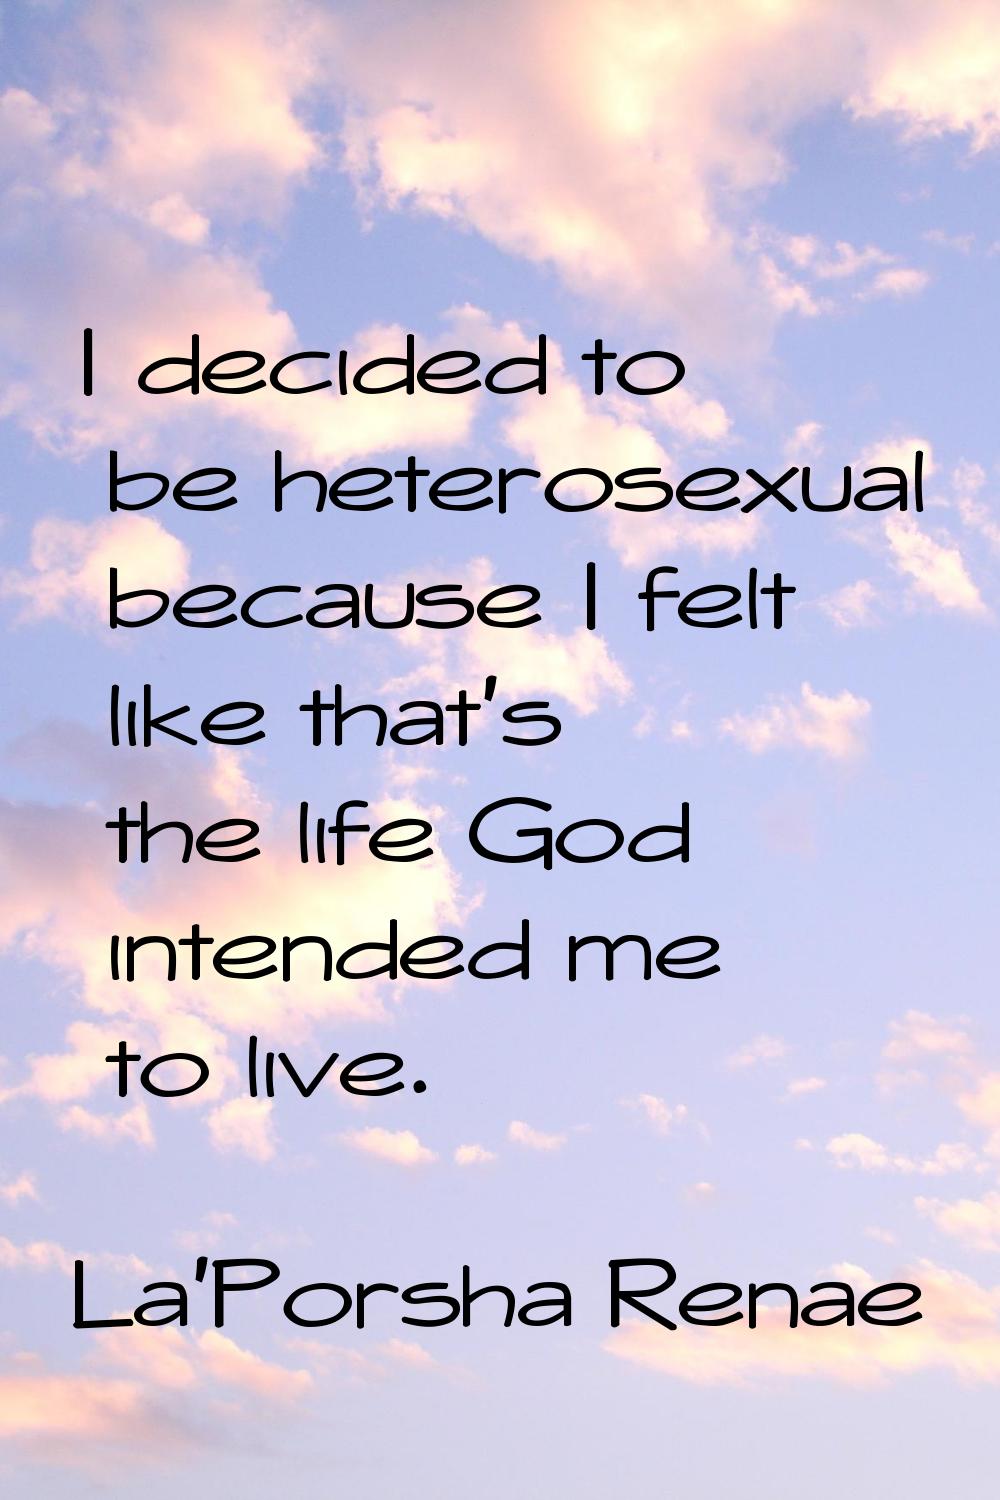 I decided to be heterosexual because I felt like that's the life God intended me to live.